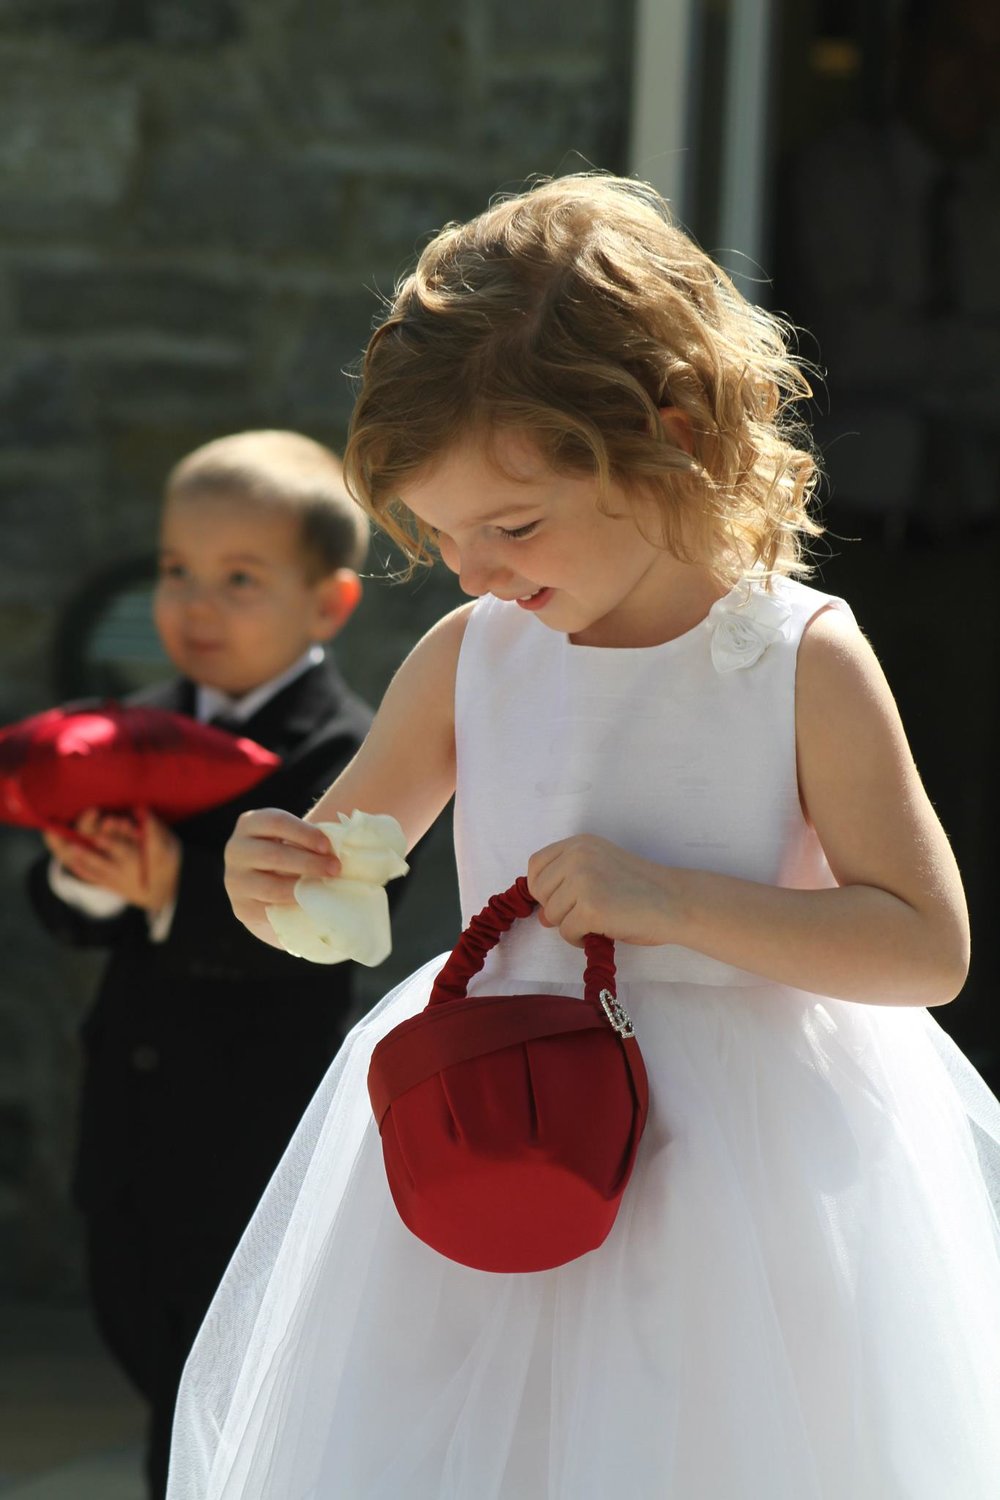 Fascinated flower girl enjoys Kendra and Nathan's wedding in Columbus Ohio while officiant Damian awaits bride's entrance